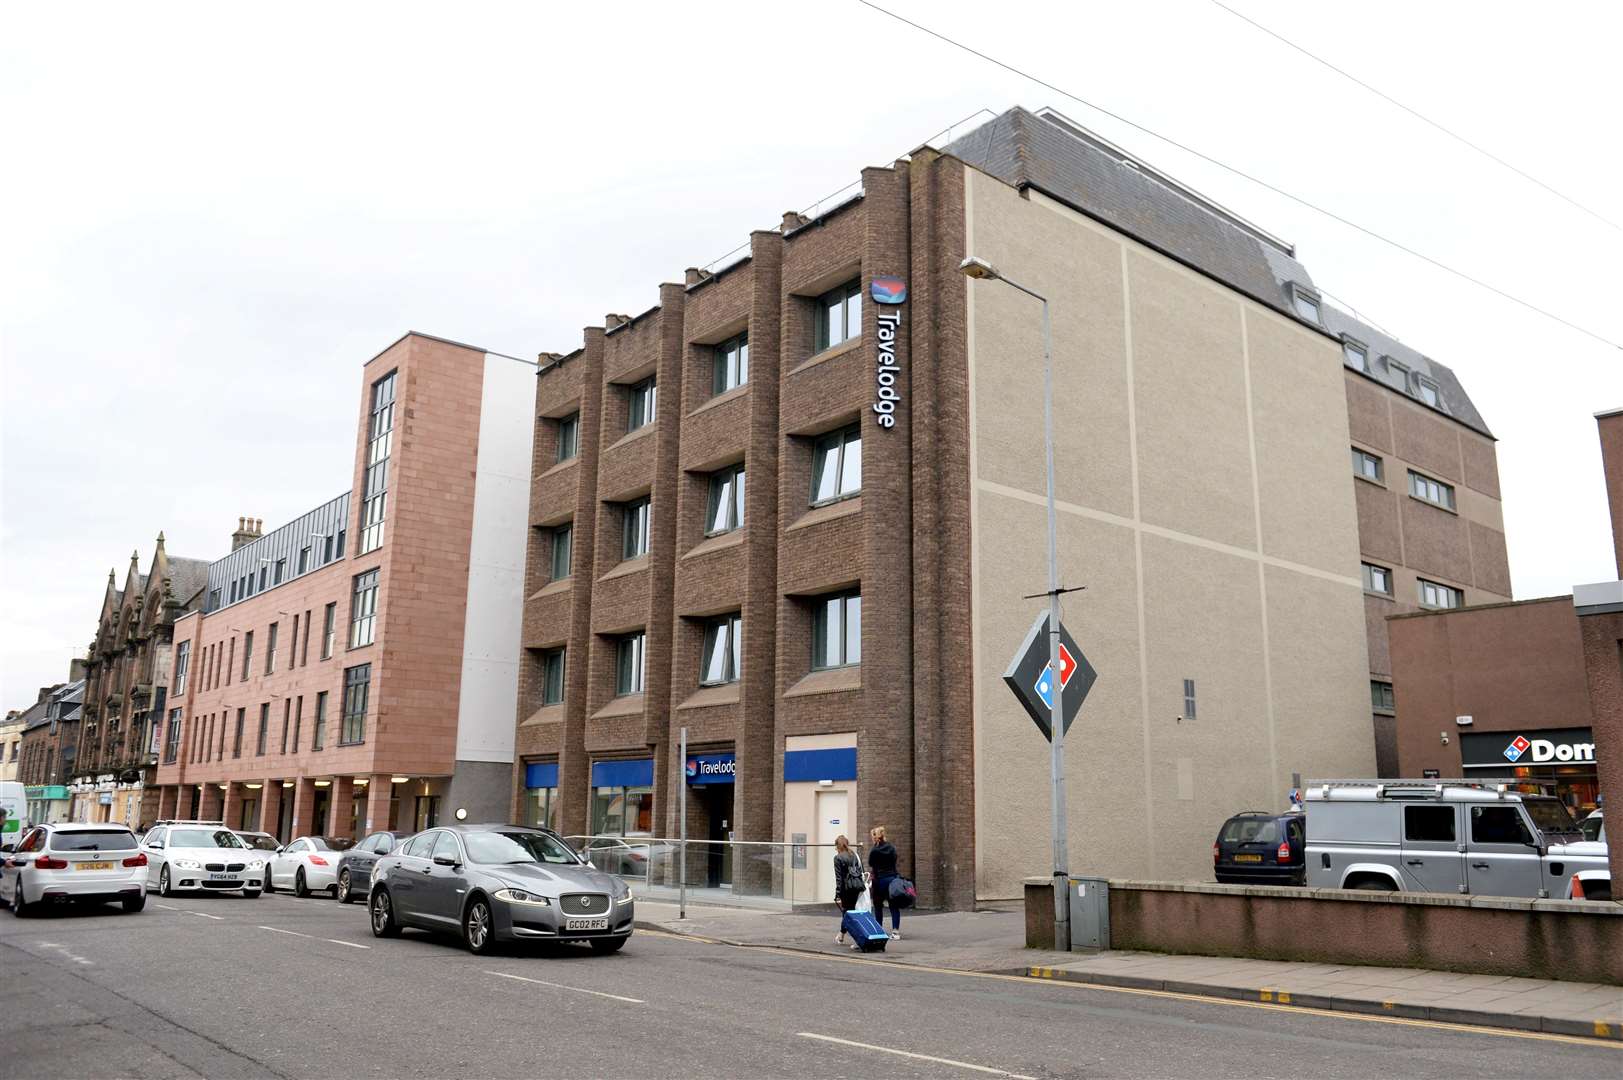 Travelodge recently opened its third hotel in Inverness on Academy Street and now has Aviemore as a target.